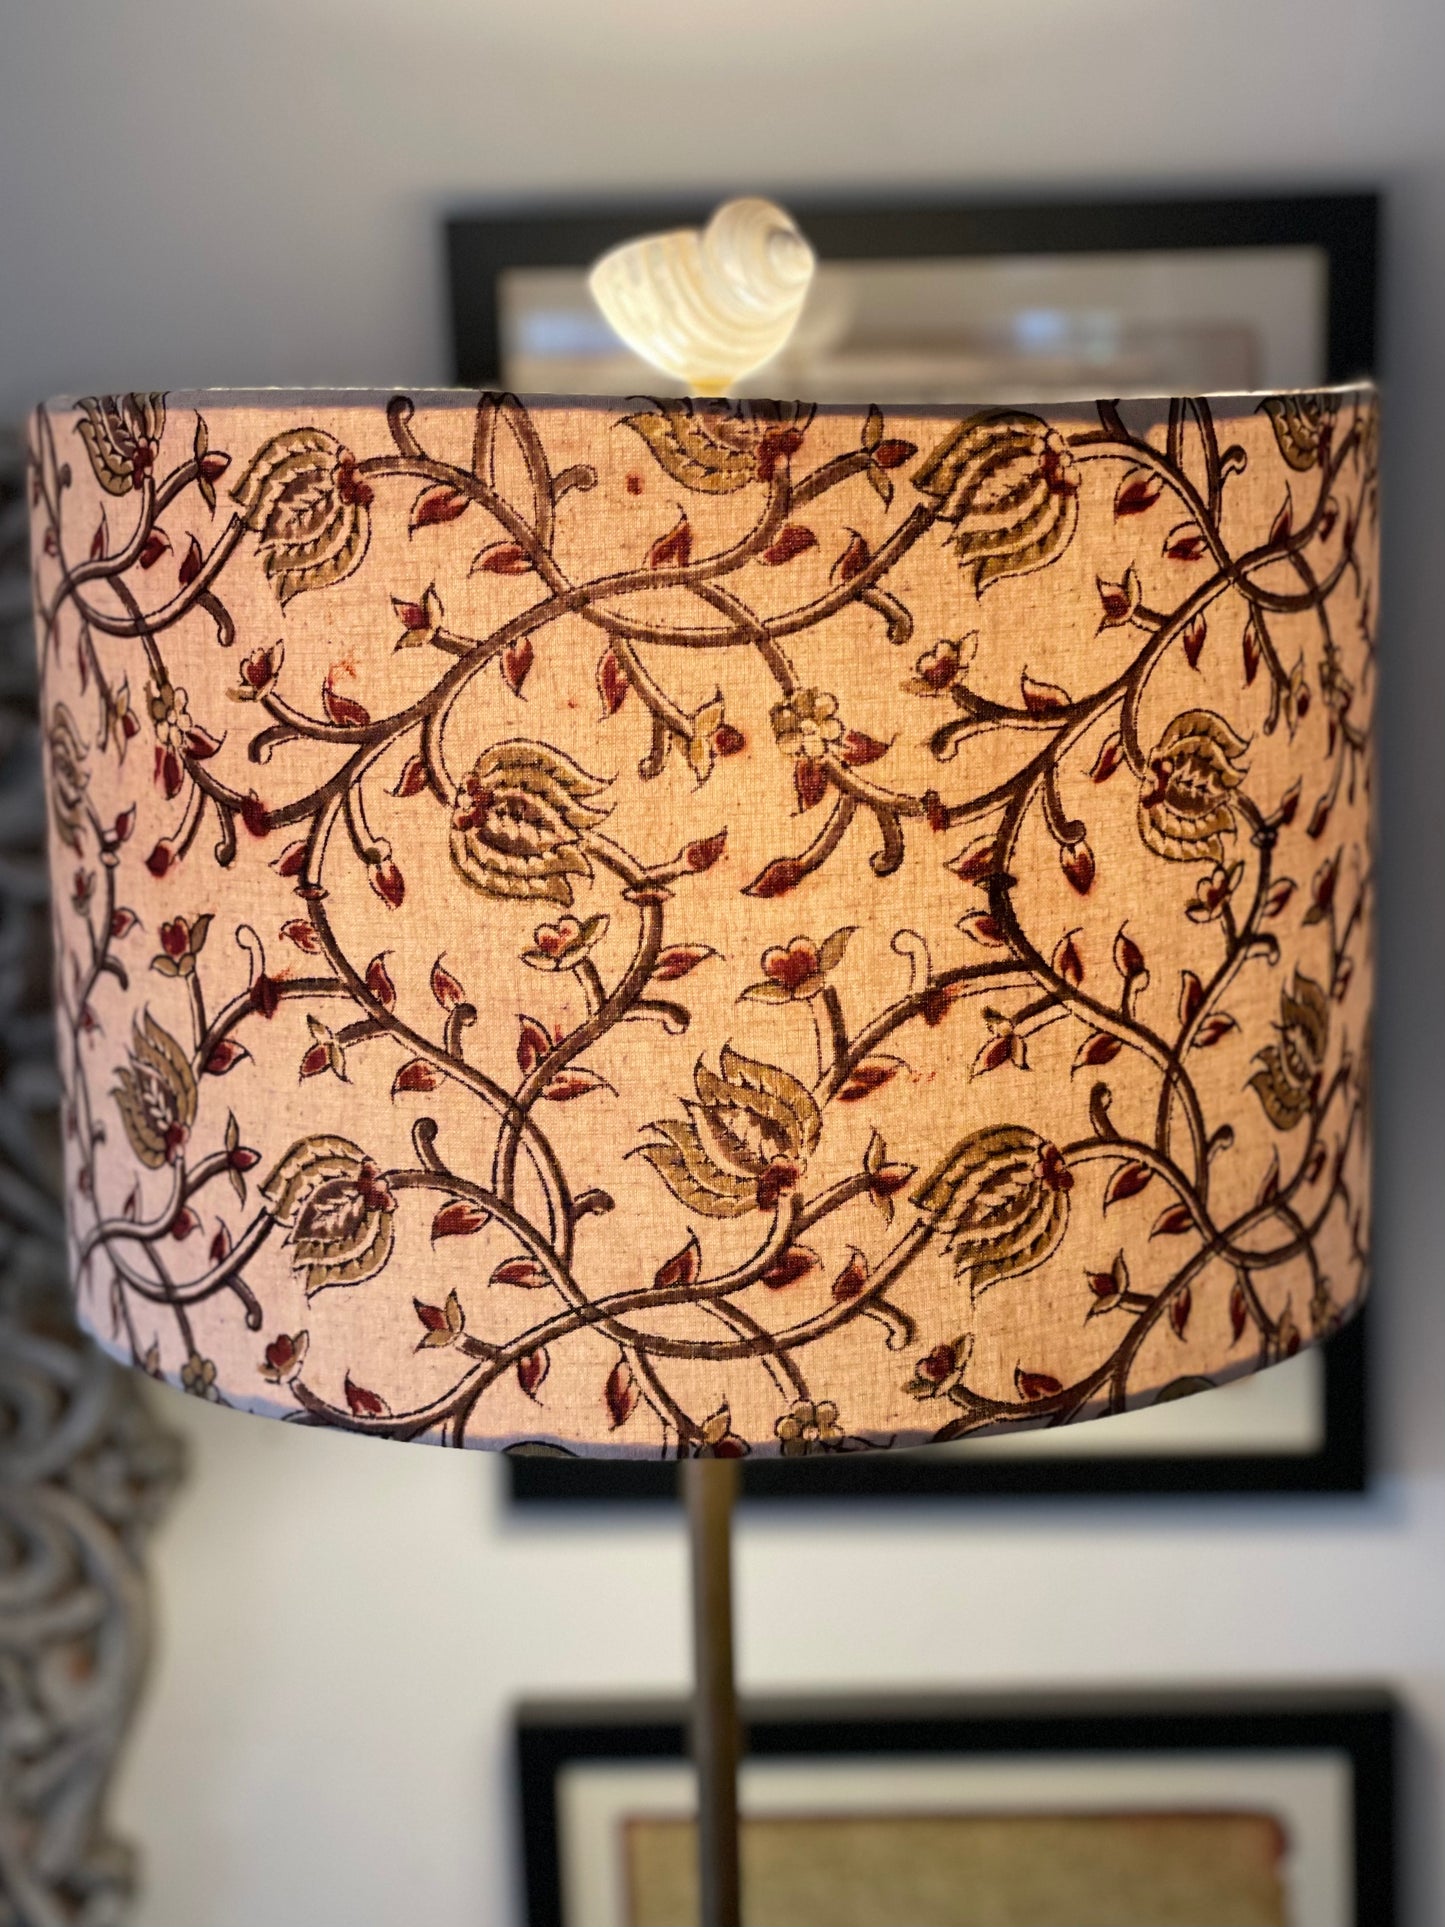 12 Inch Drum Shade. Indian Kalamkari Hand Block Print. Shades of Russet, Ochre, and Coffee, on Fawn.